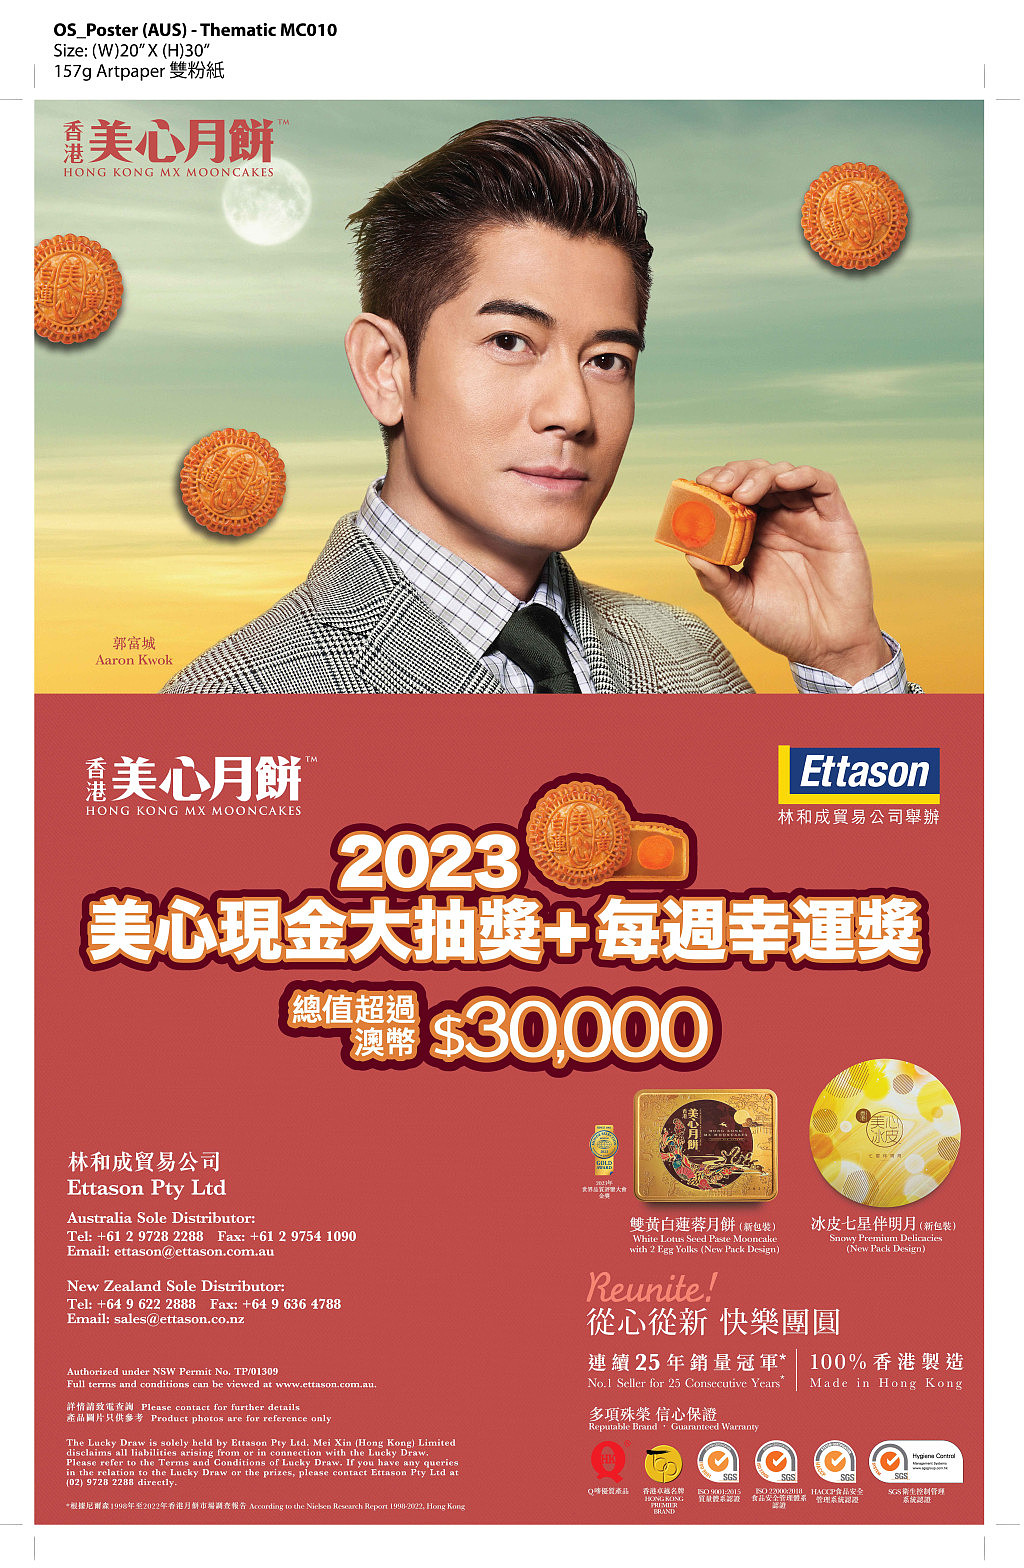 Lucky draw poster with Celebrity.jpg,0